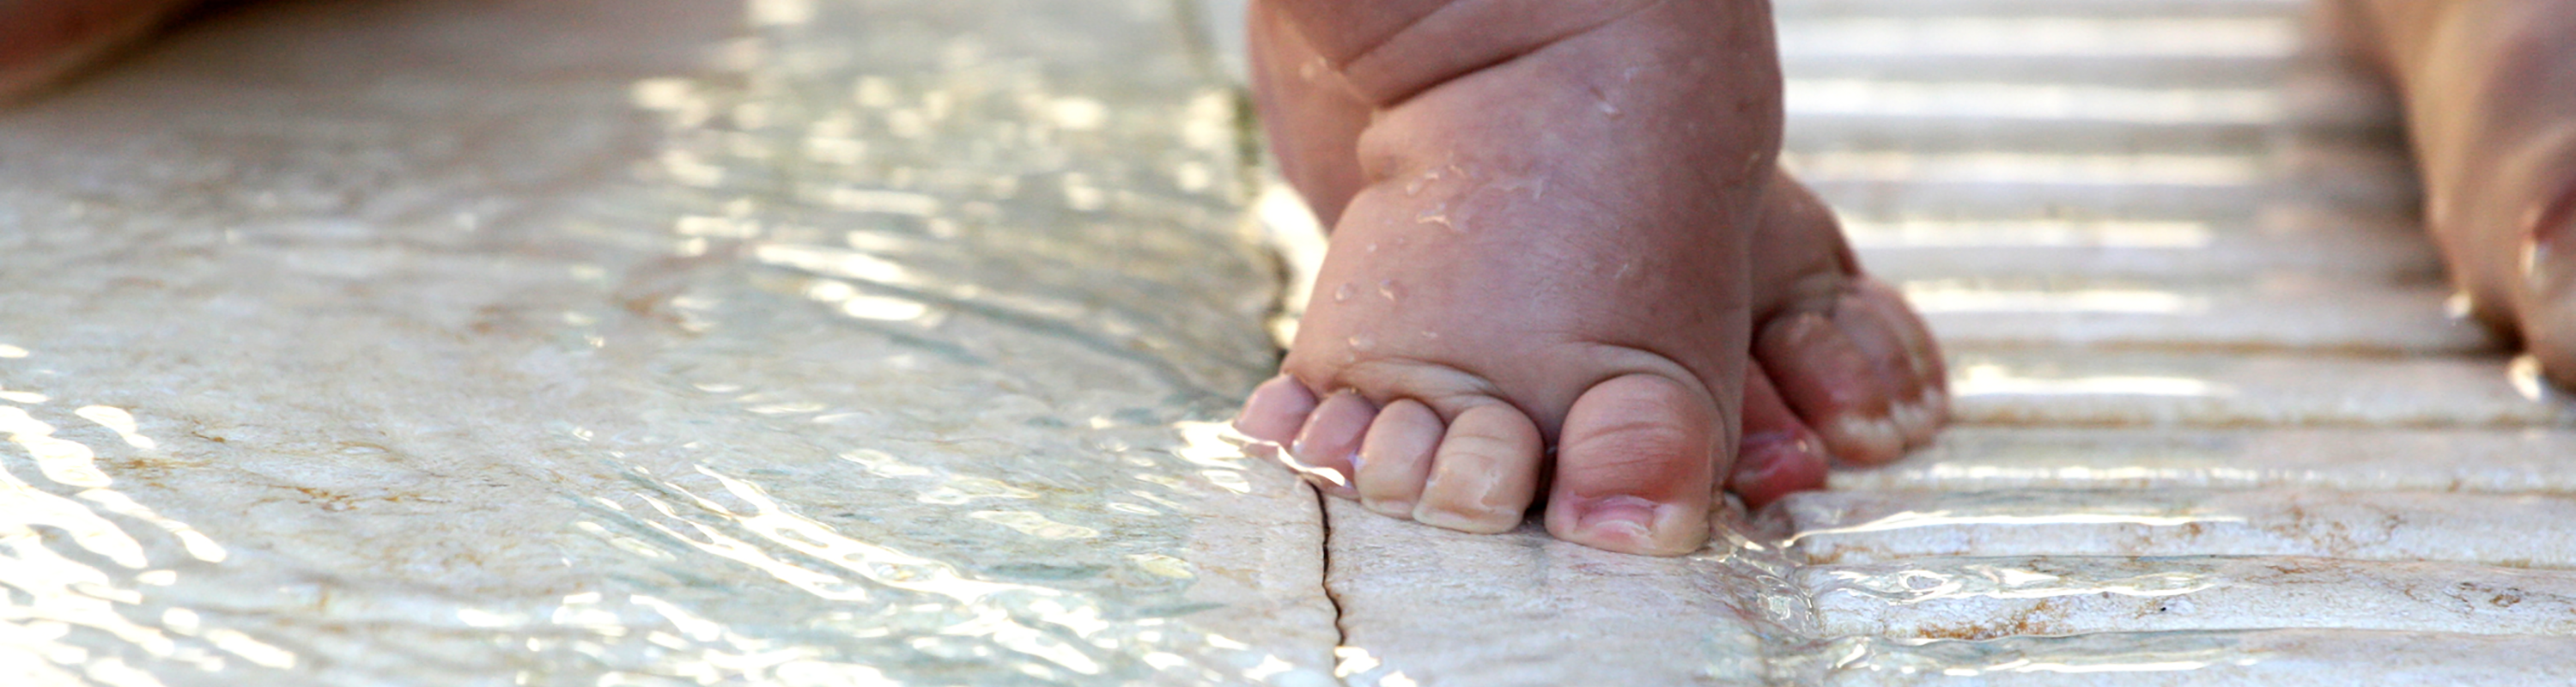 Baby's first steps in a shallow pool of water. © Keki | Dreamstime Images